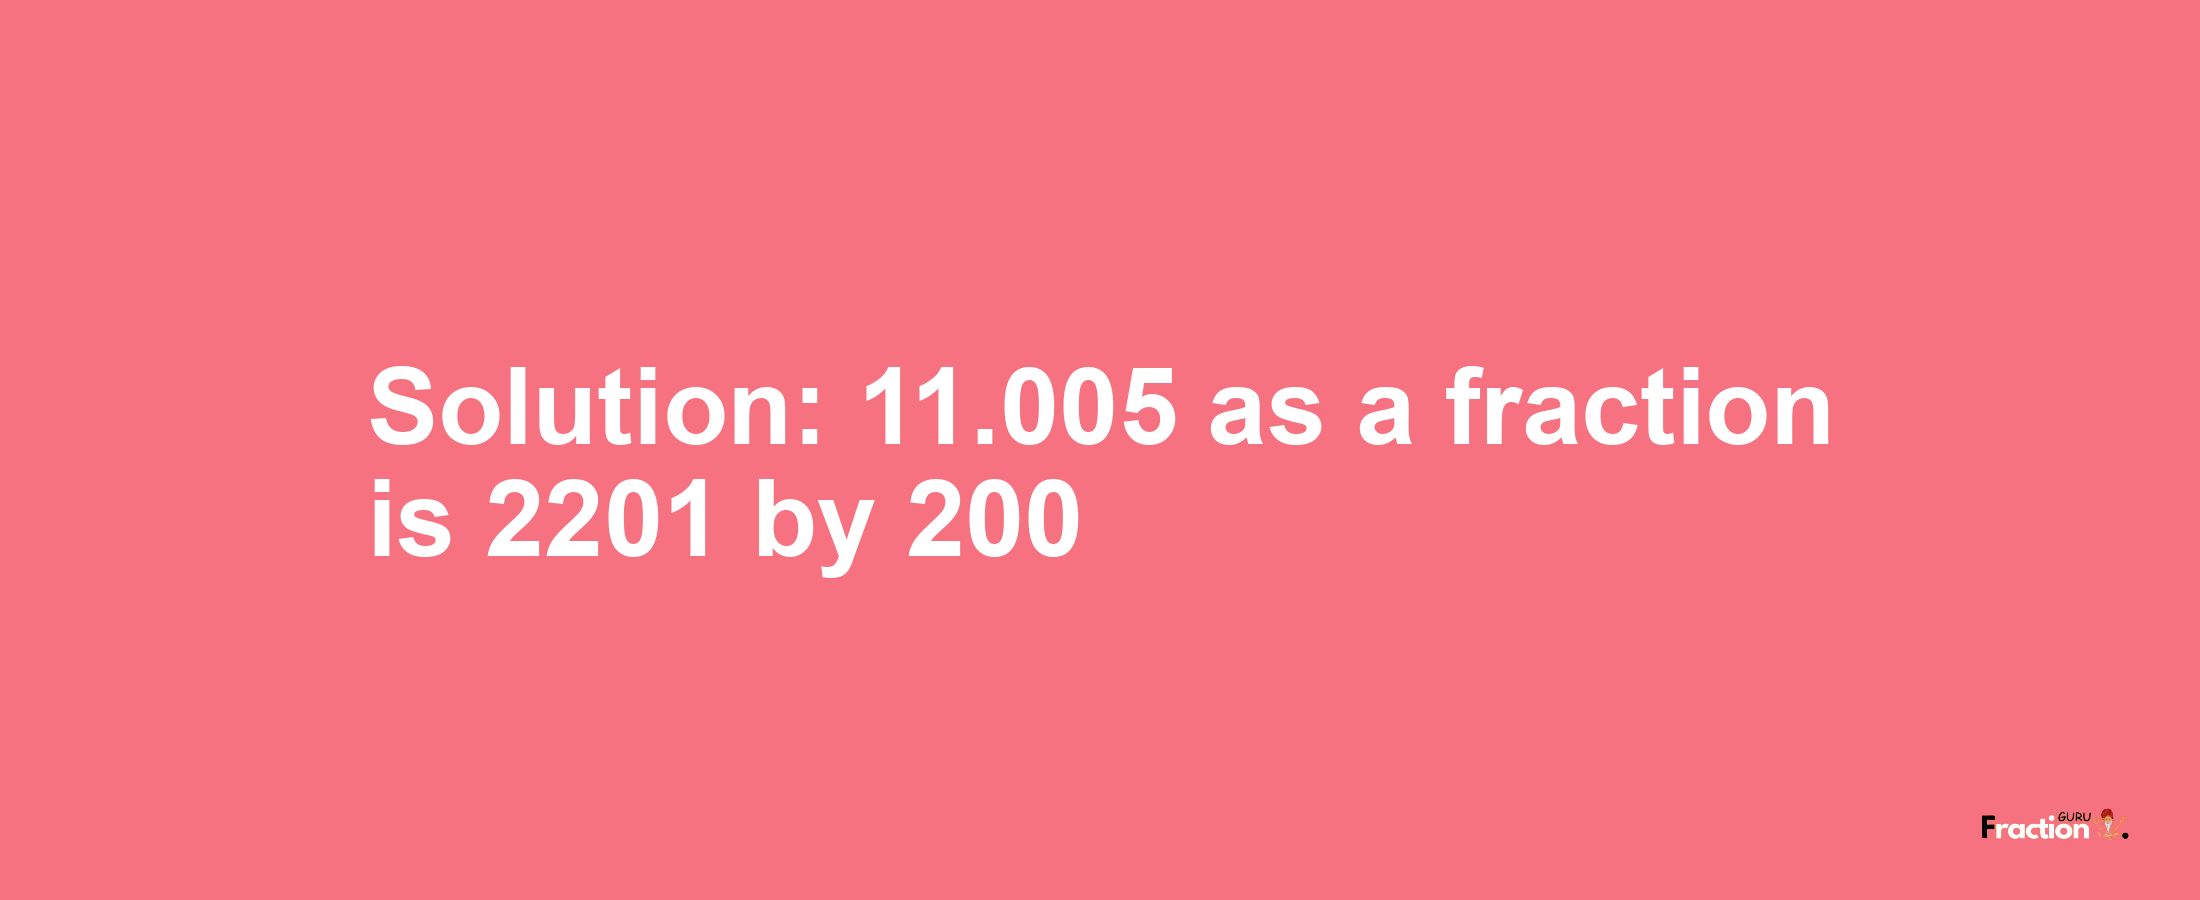 Solution:11.005 as a fraction is 2201/200